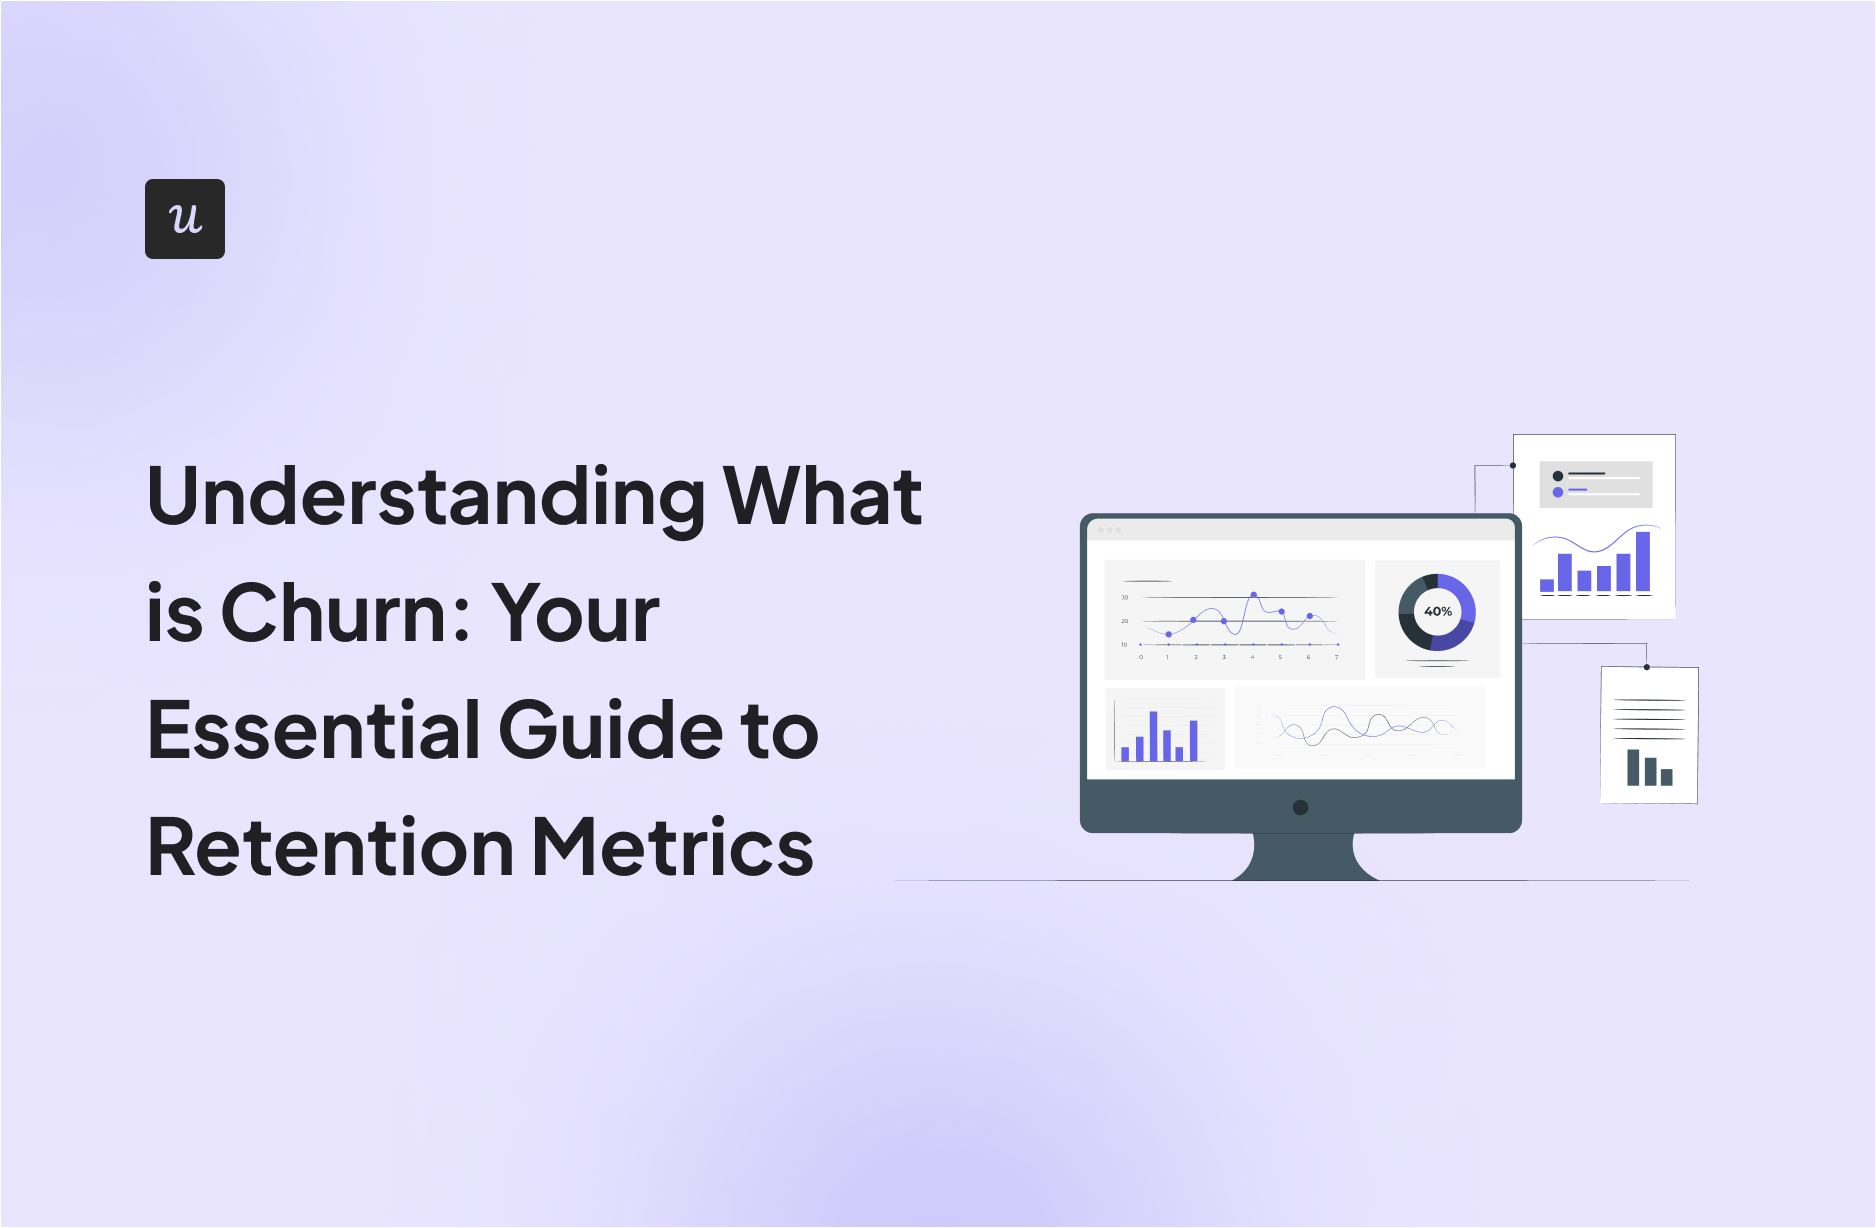 Understanding What is Churn: Your Essential Guide to Retention Metrics